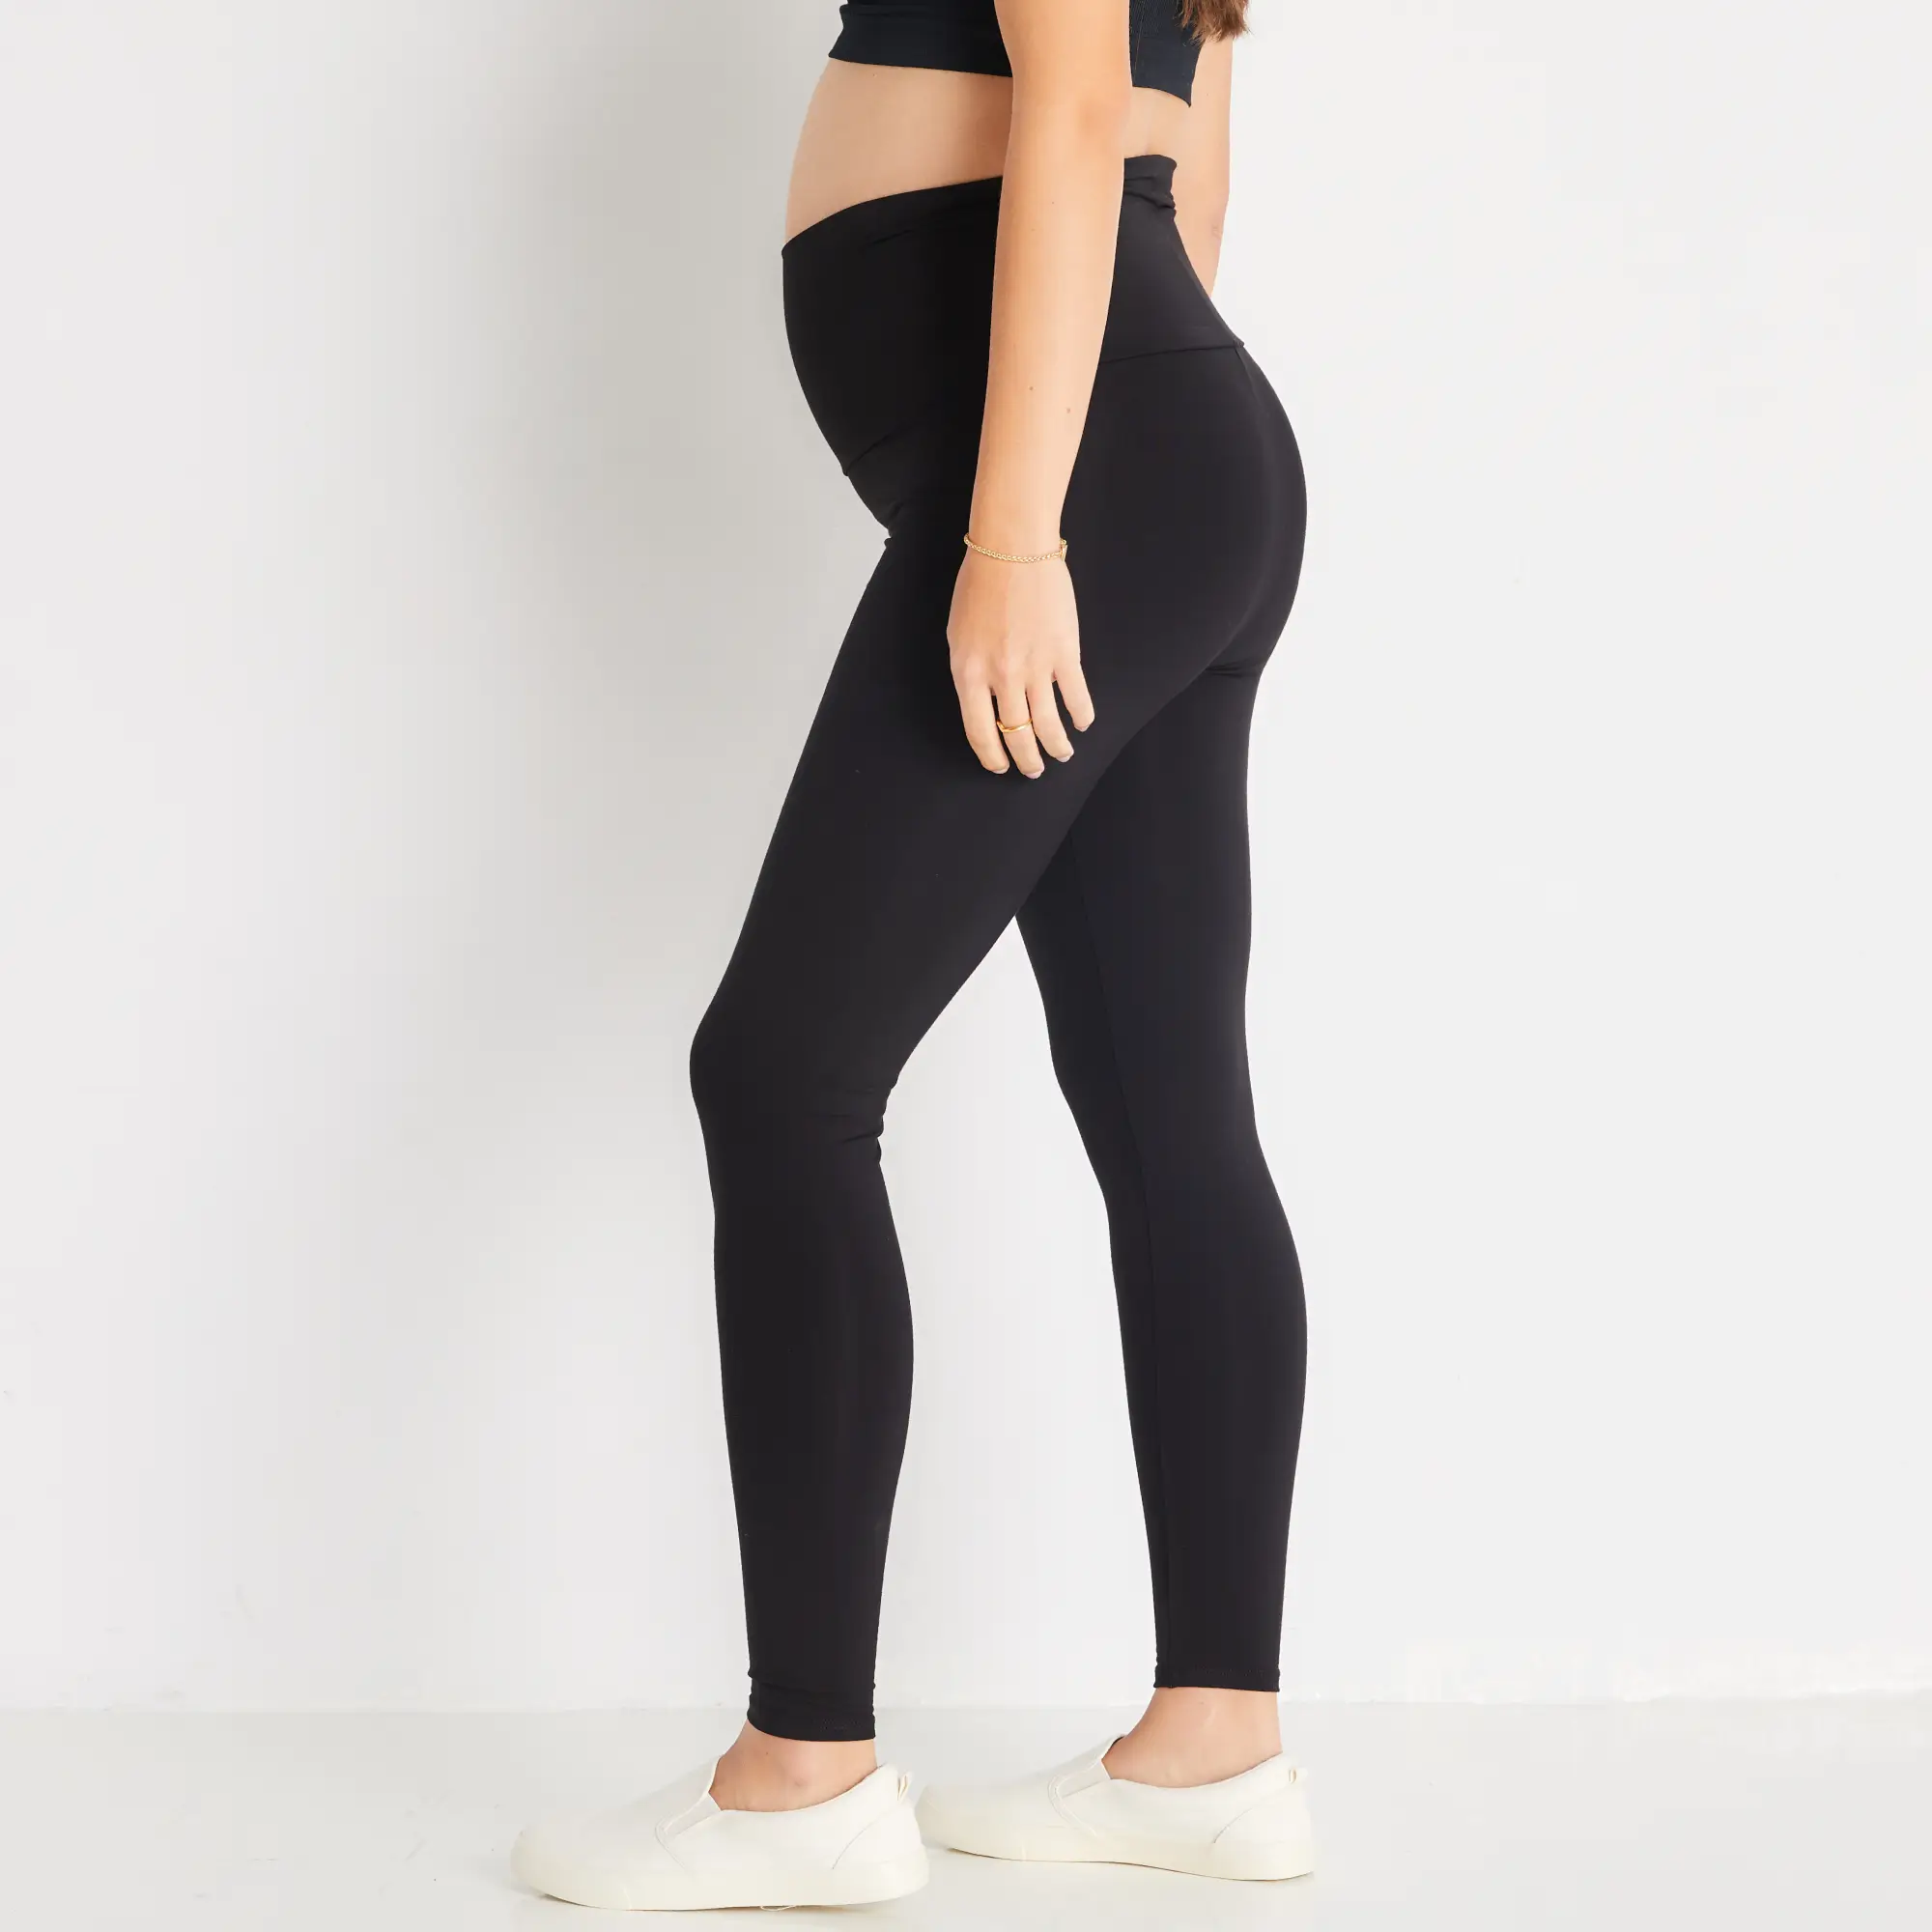 HATCH The Ultimate Maternity Over The Bump Leggings